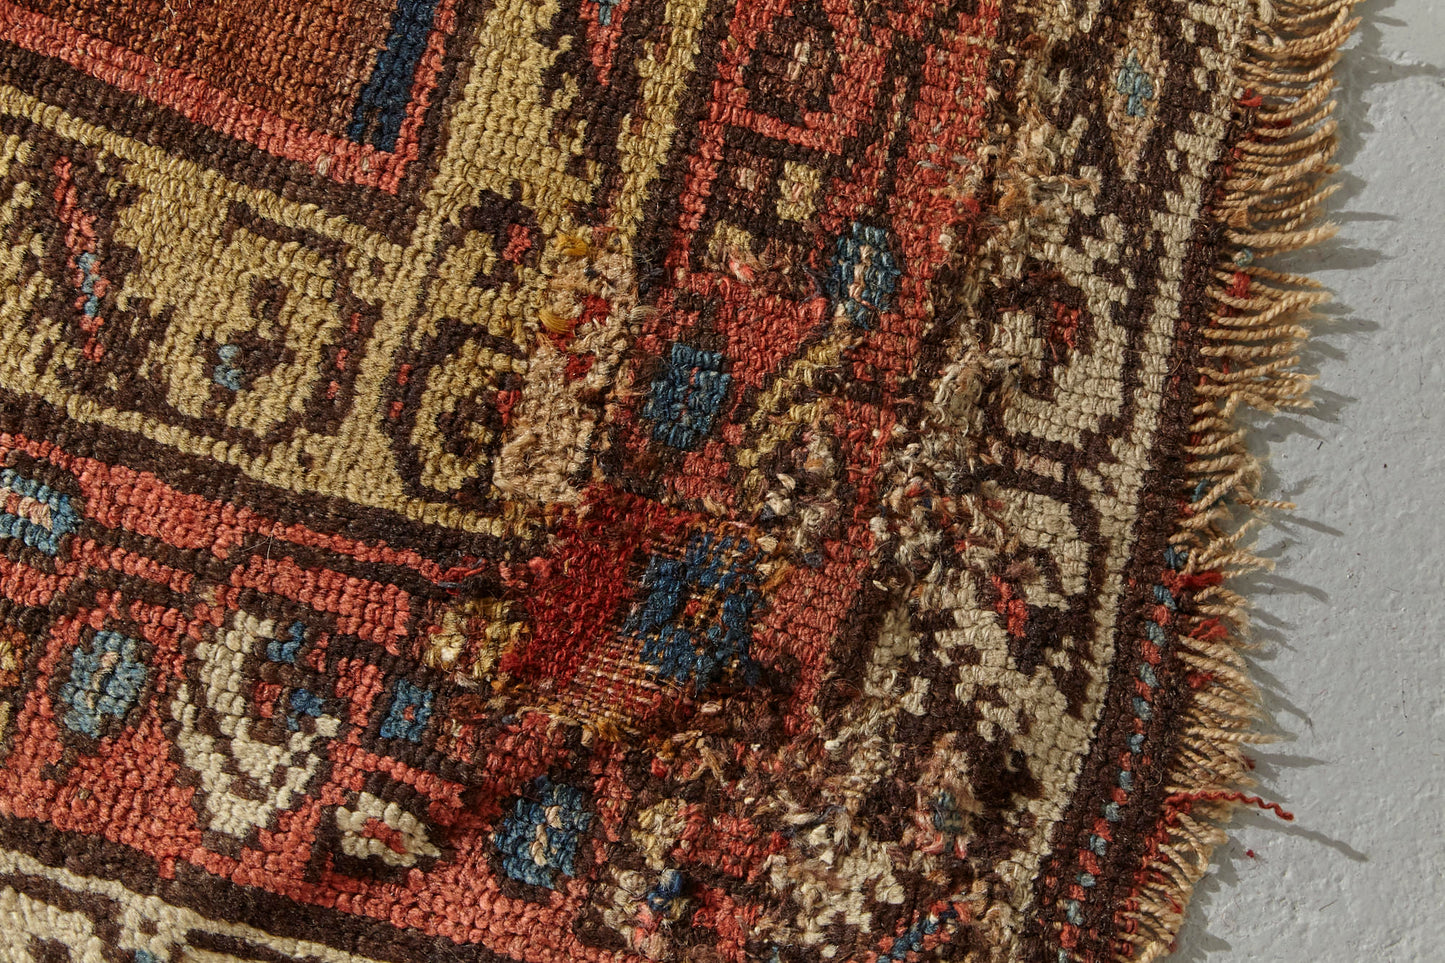 Corner detail of Kurdish antique Persian rug, hand woven with tree of life design on a blue background with gold, red, pink and cream branch and leaf designs throughout, would be beautiful in a bedroom, kitchen, hallway or living room - Available from King Kennedy Rugs Los Angeles